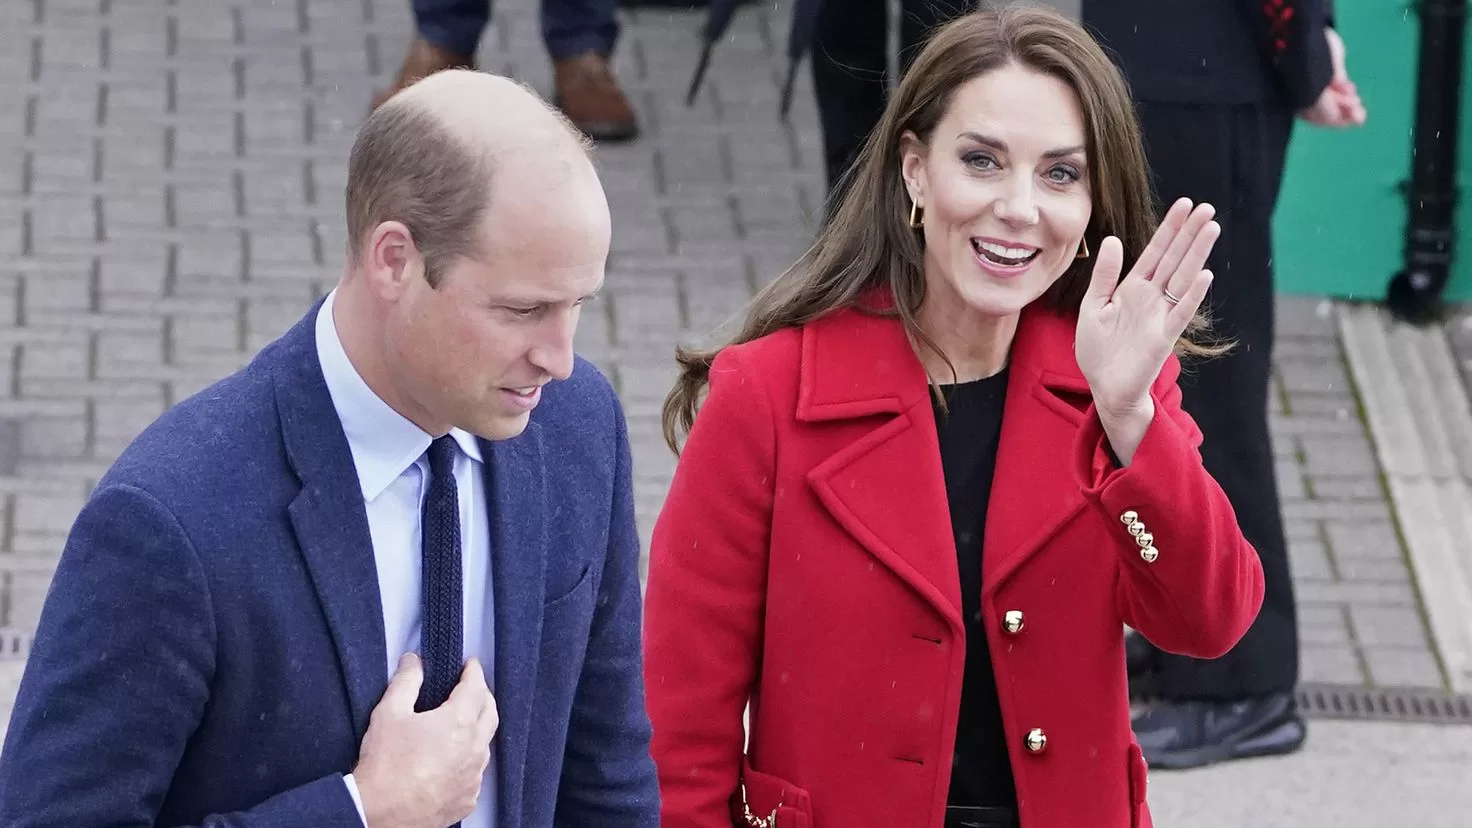 Kate Middleton attends a 24-hour rave with Prince William's alleged lover
